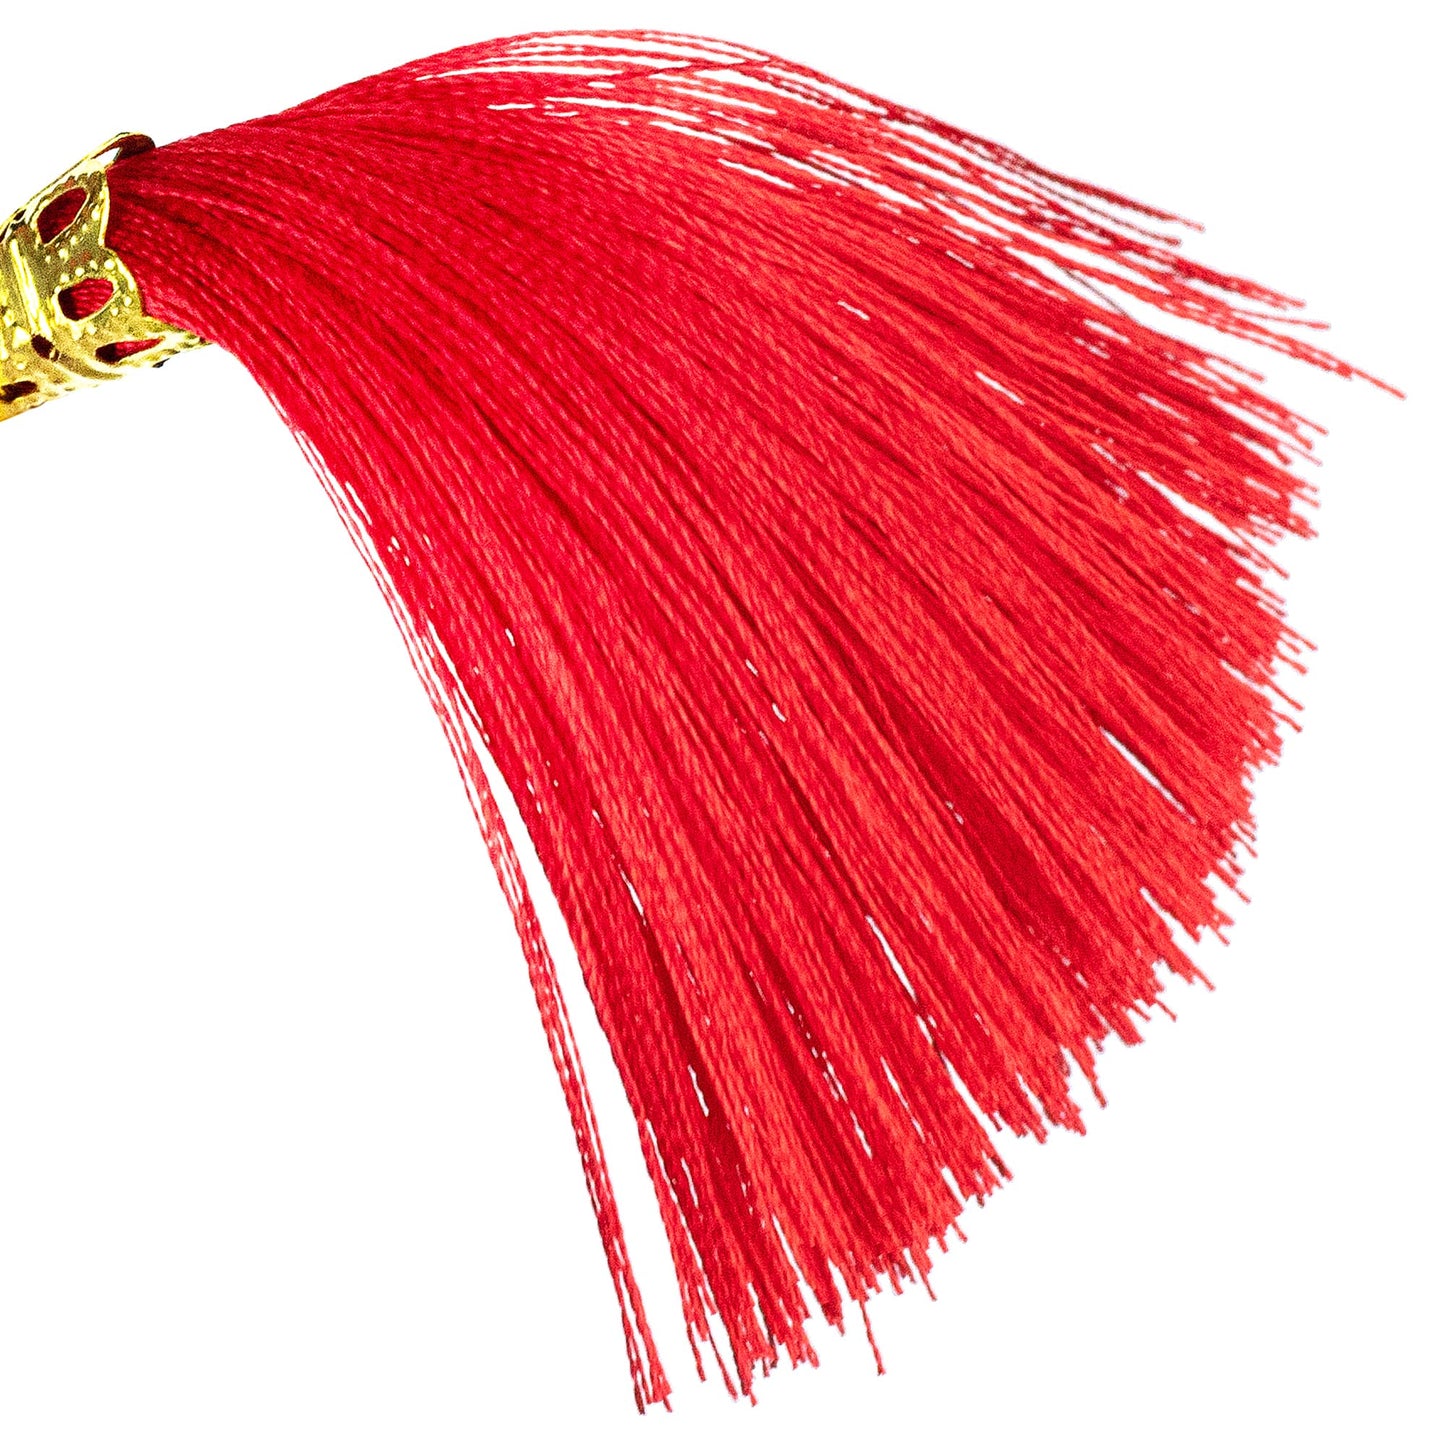 The red sexy tassels of the nipple clit tassel clamp with chain